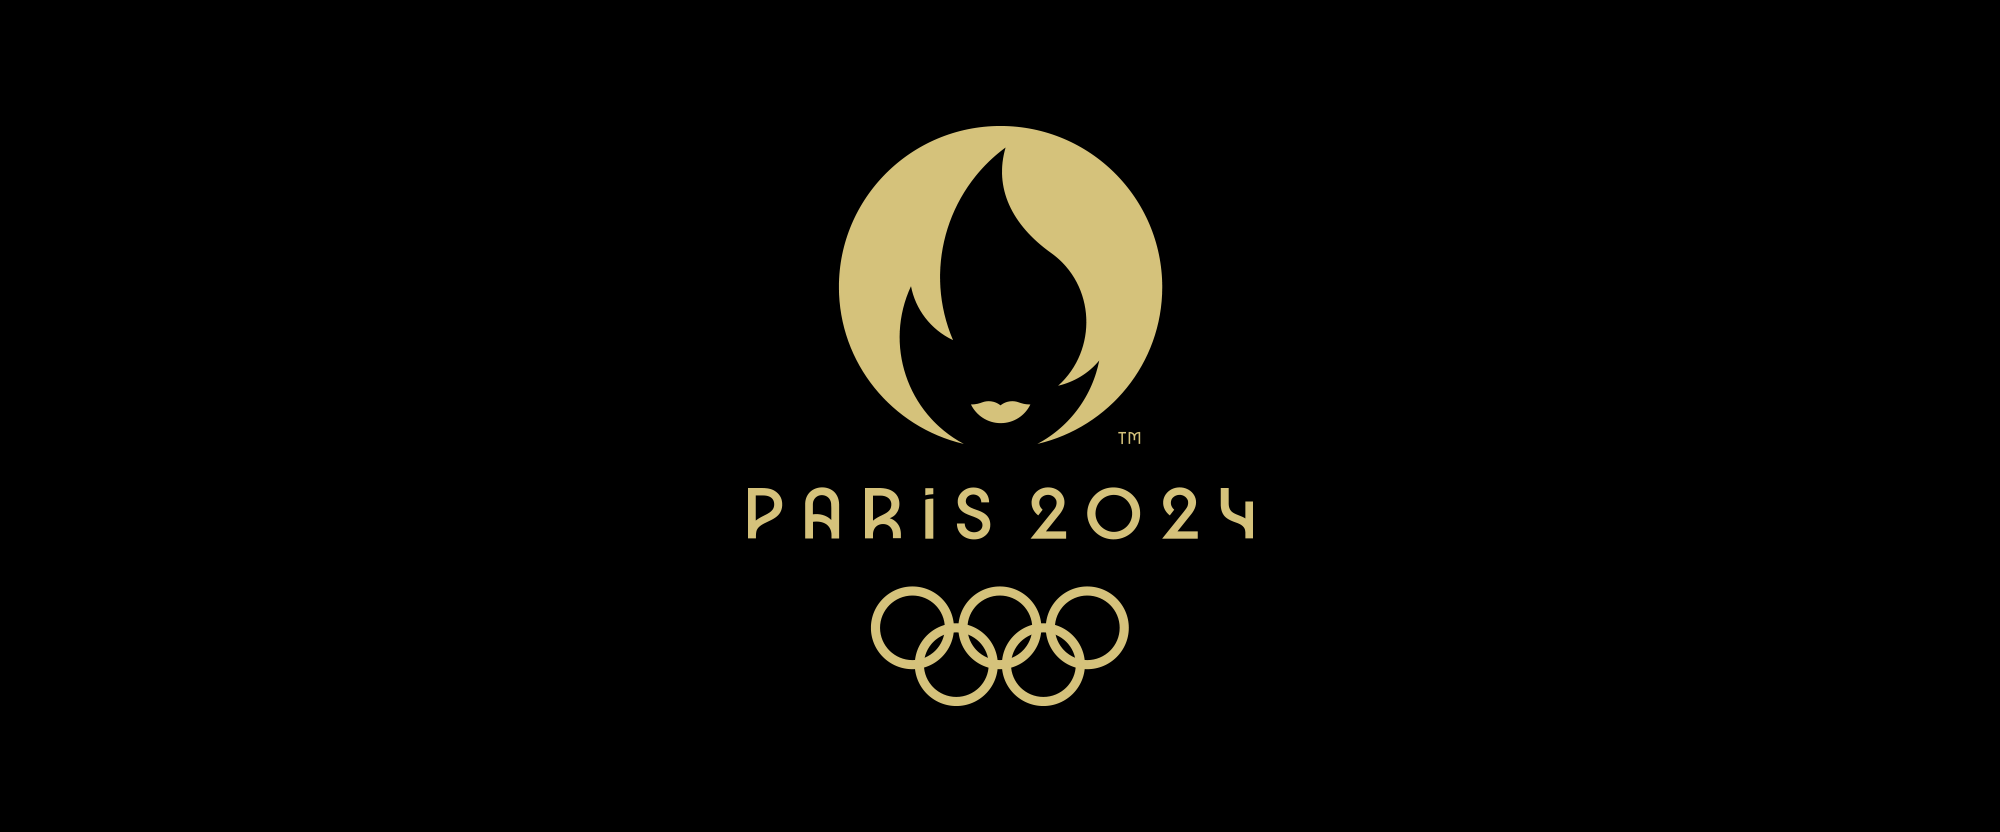 LVMH Branches into Sports with Paris 2024 Olympic Games